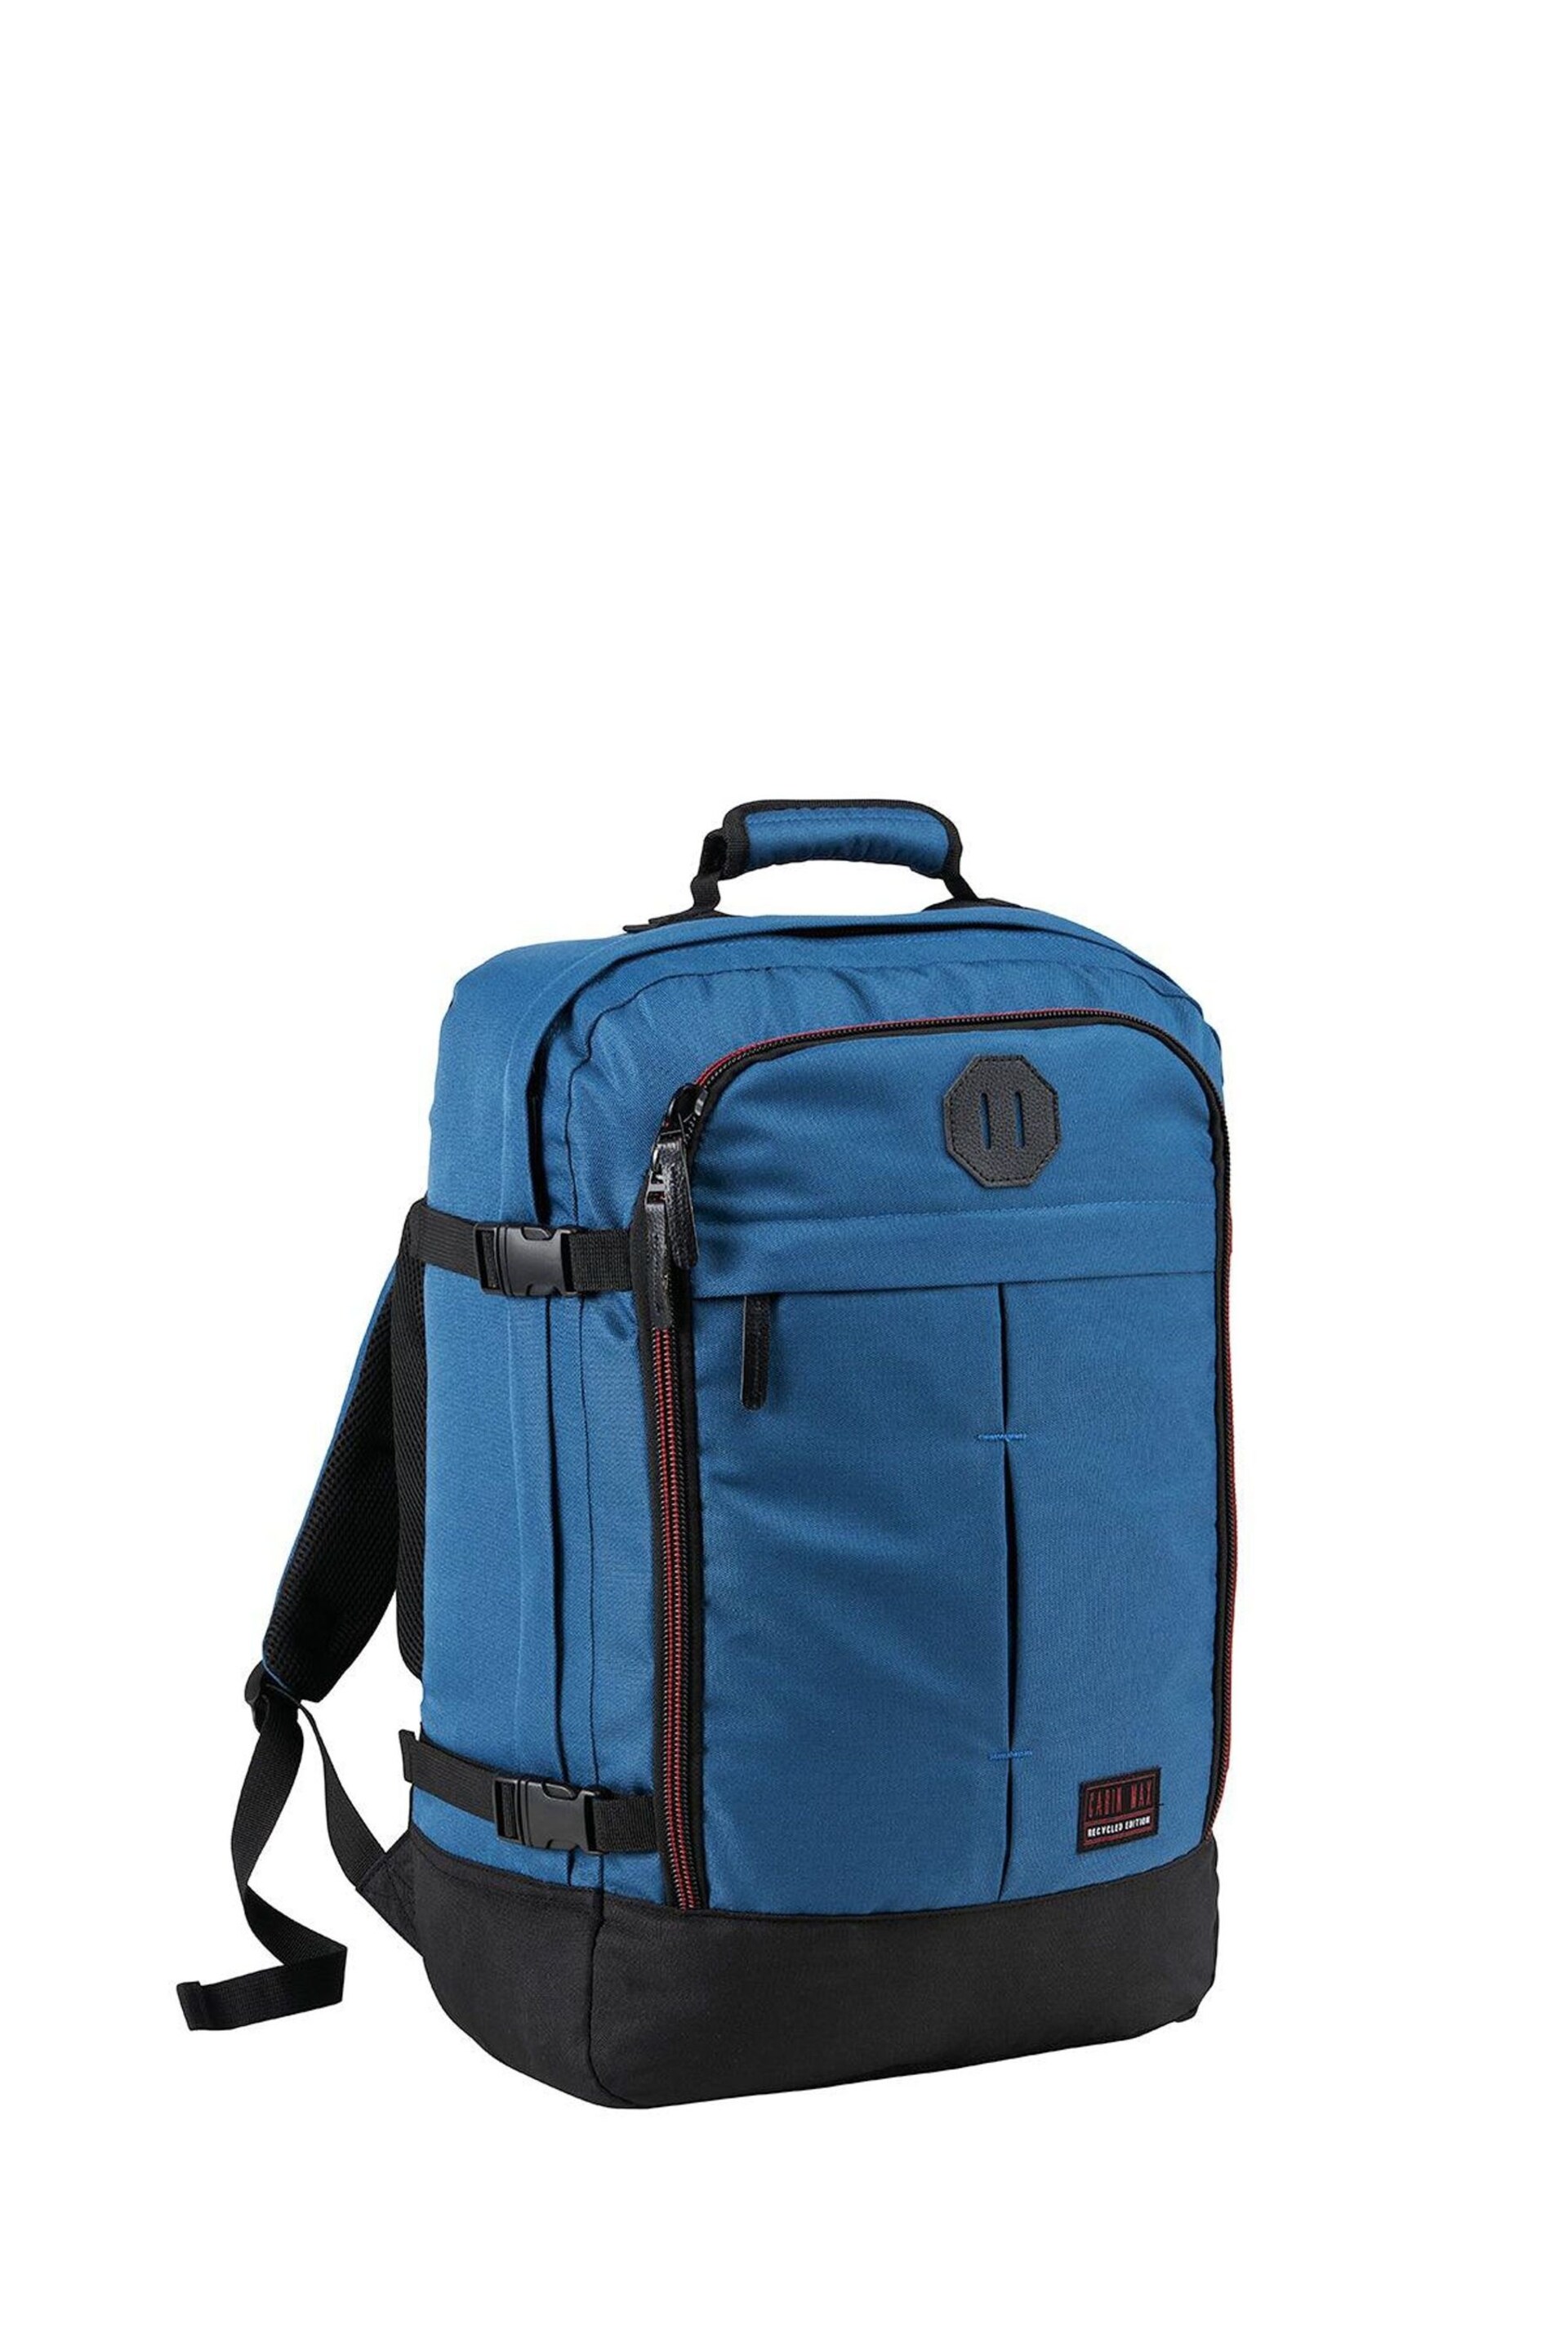 Cabin Max Metz 44L Carry On 55cm Backpack - Image 3 of 4